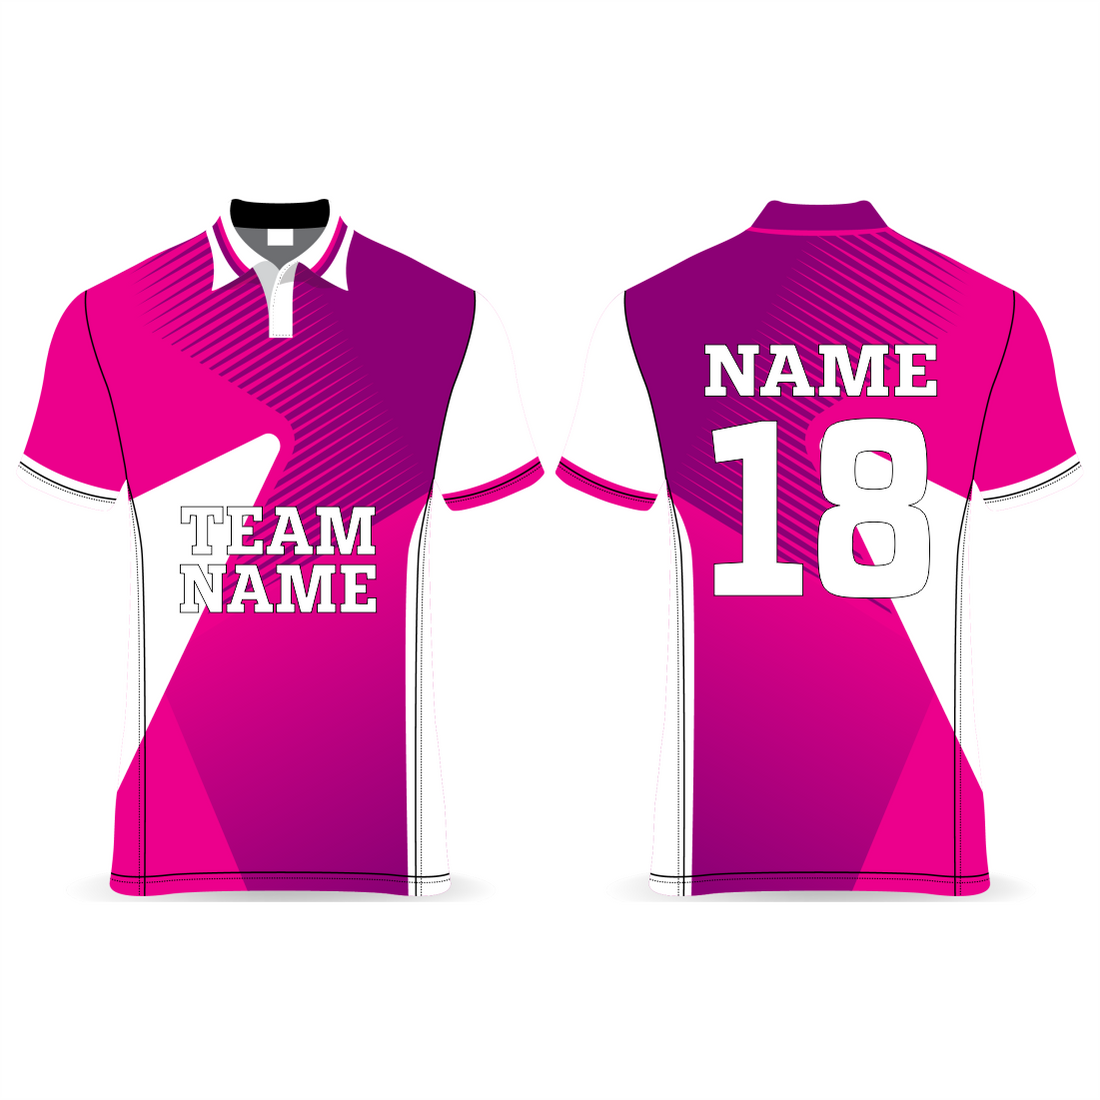 NEXT PRINT All Over Printed Customized Sublimation T-Shirt Unisex Sports Jersey Player Nam. 1918964198e & Number, Team Name